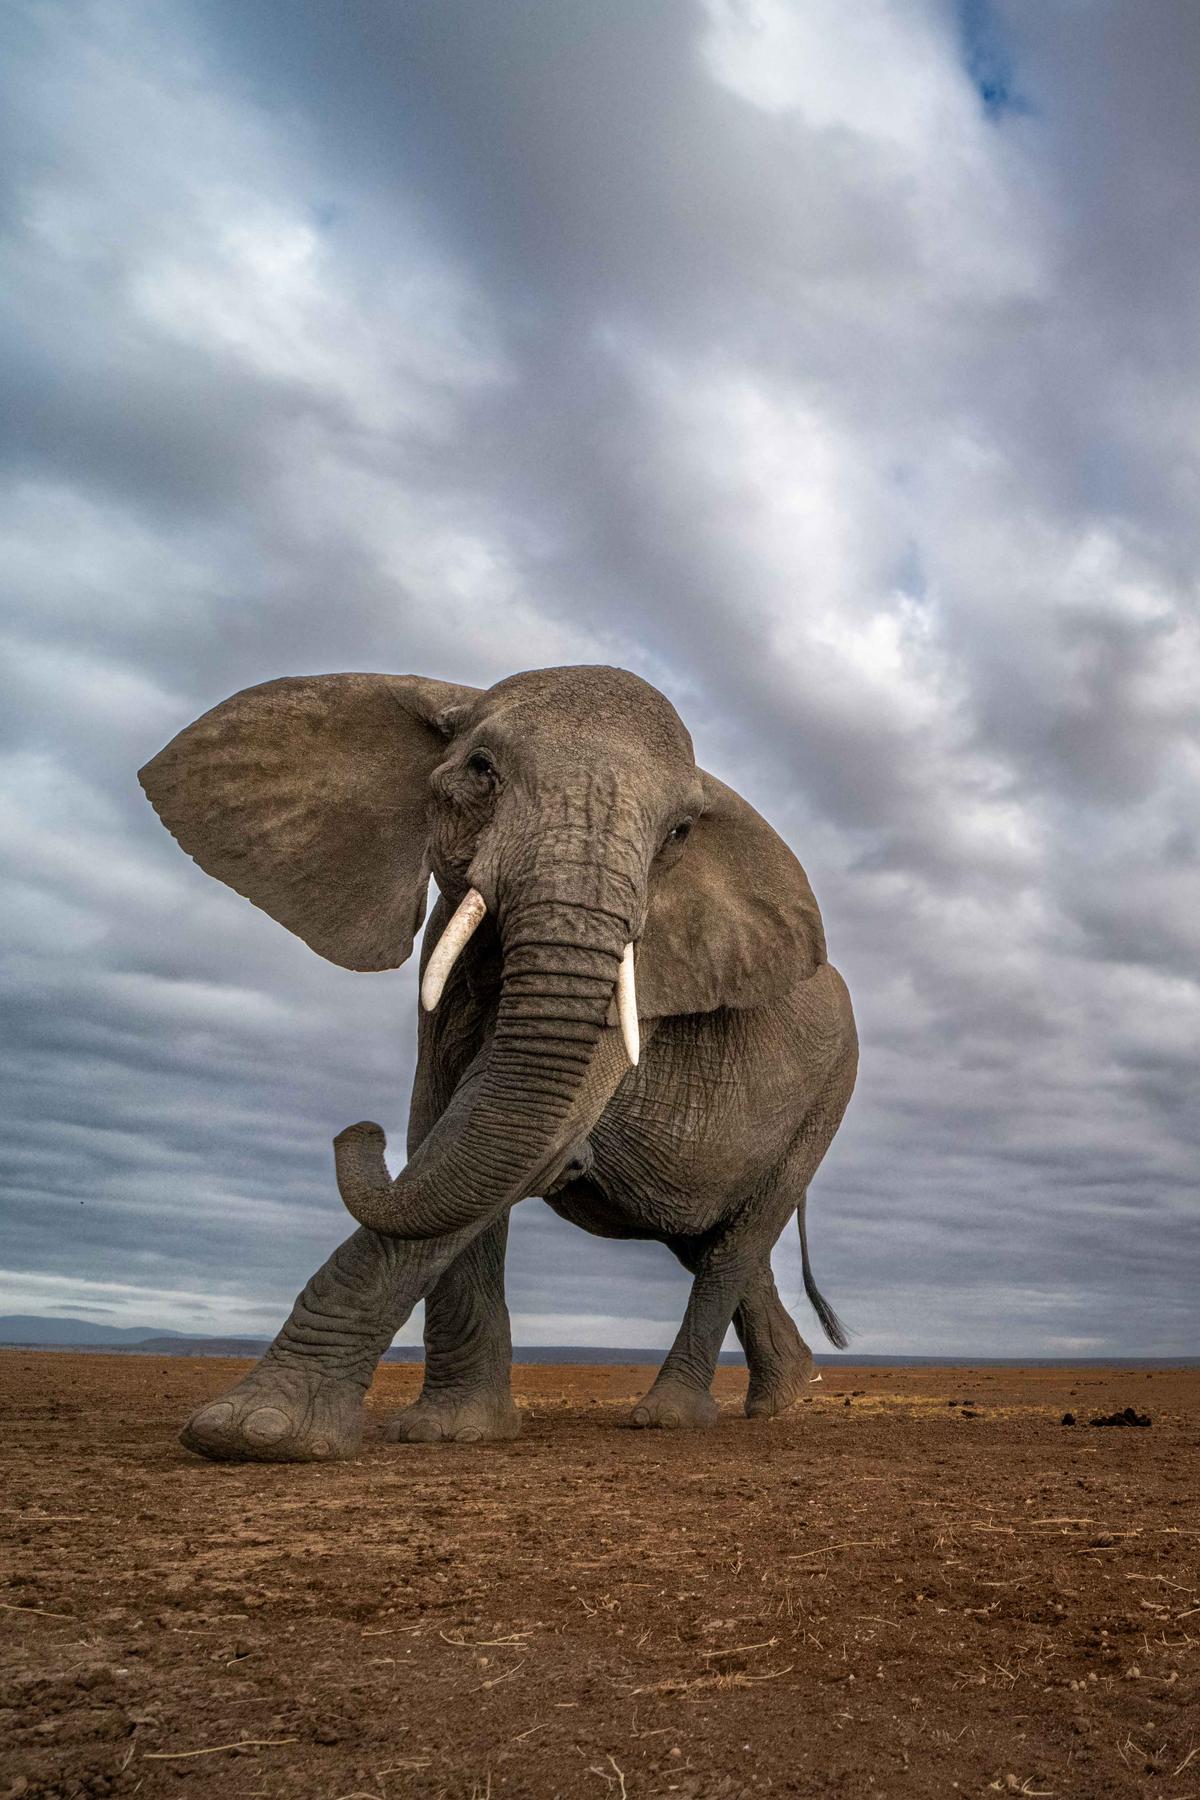 The elephants came too close for comfort when Yarin Klein left his camera unattended in Amboseli National Park, Kenya. (Courtesy of <a href="https://www.instagram.com/yarinklein_wild_photography/?hl=en">Yarin Klein</a>)